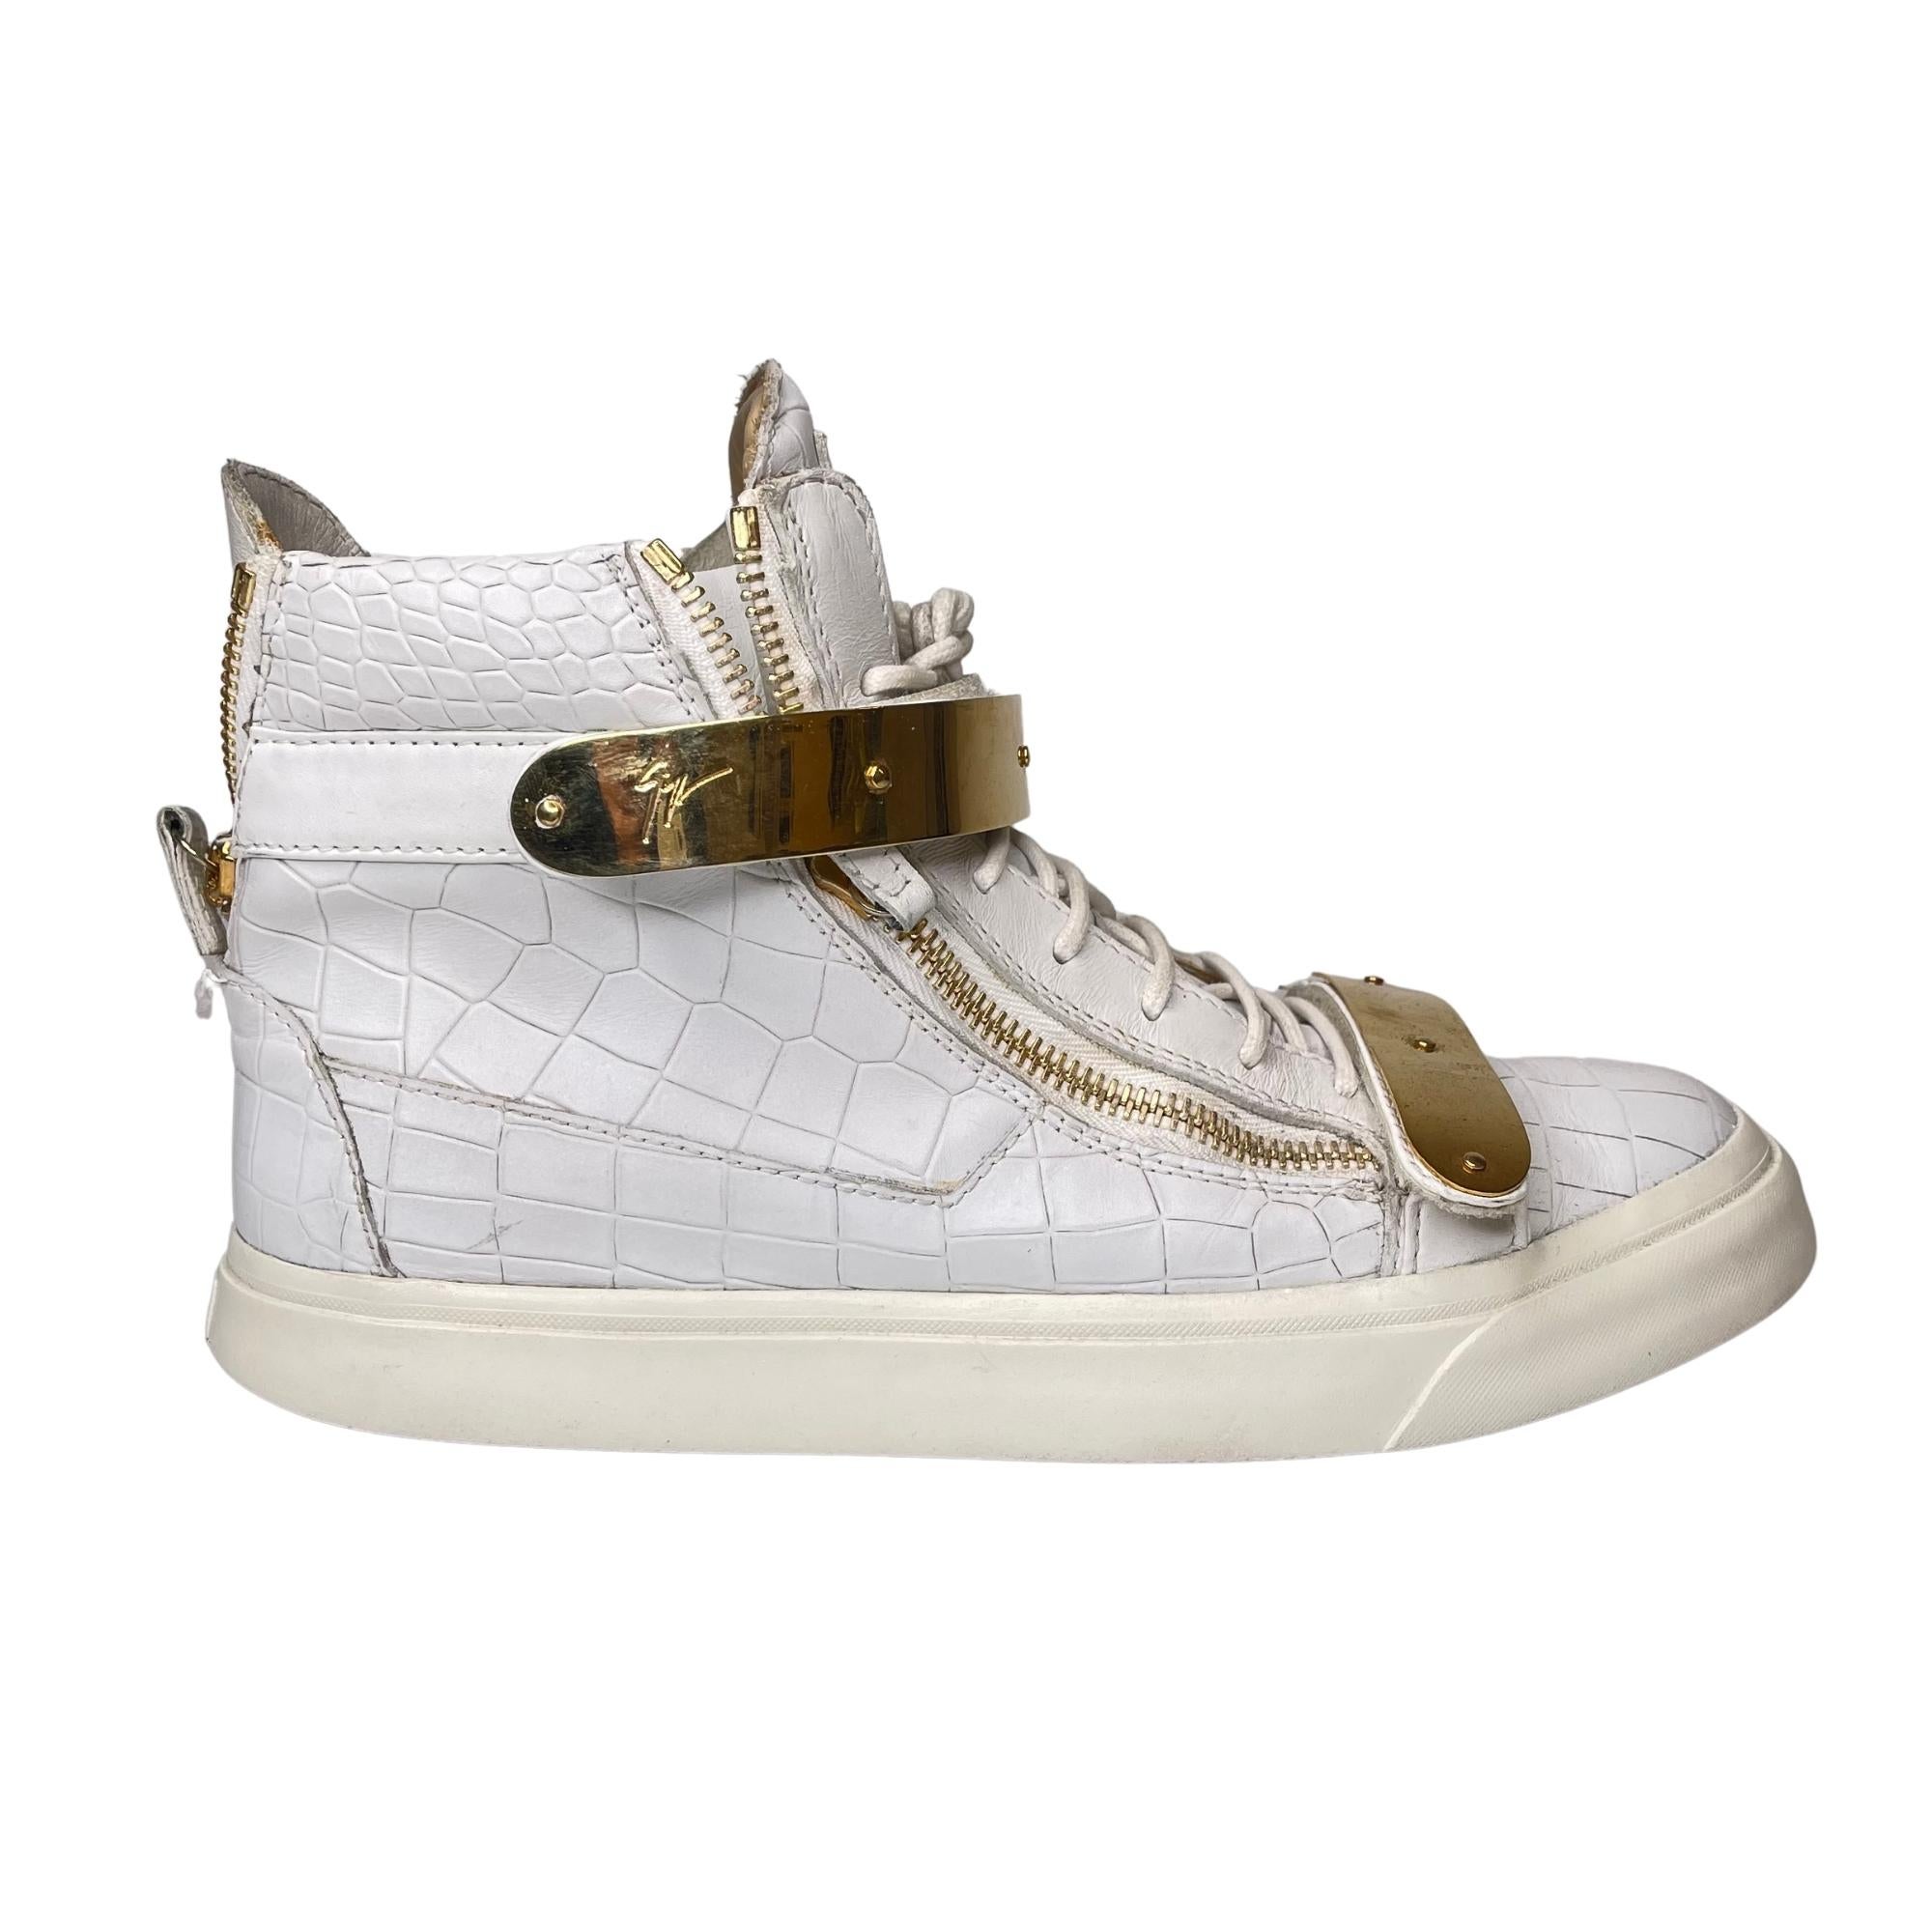 Giuseppe Zanotti White Croc Embossed Leather Coby High Top Sneakers (44 EU)